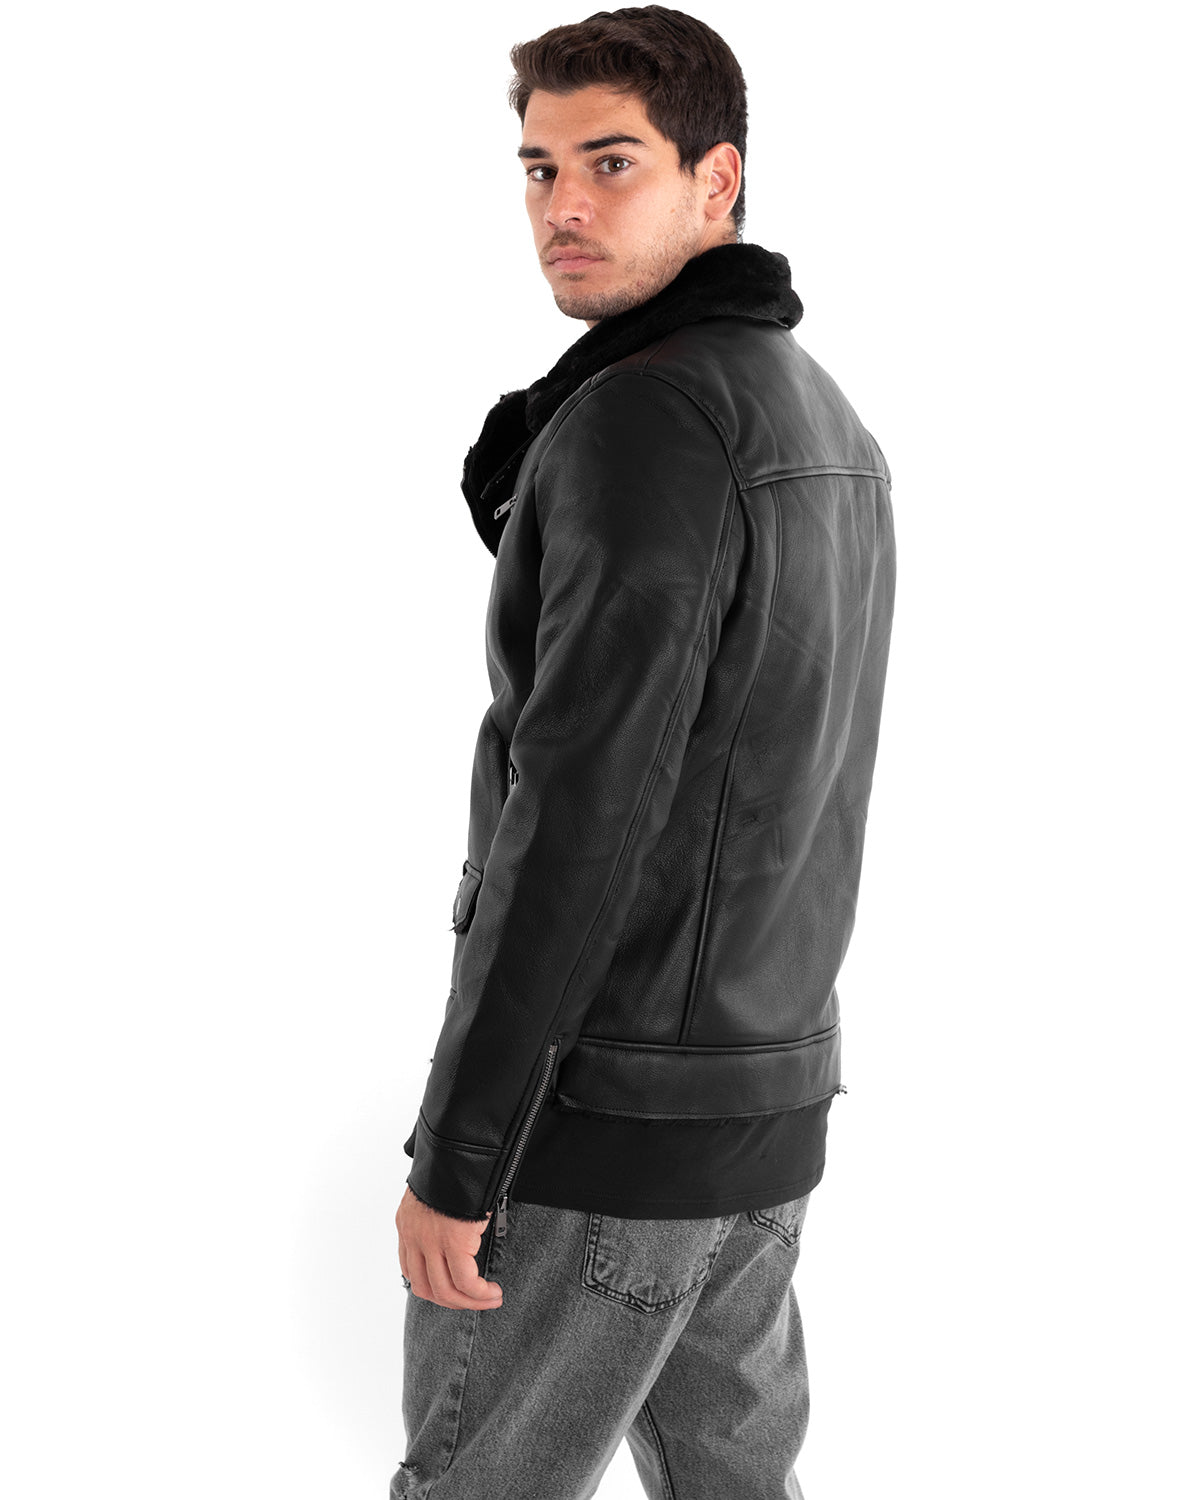 Men's Faux Leather Jacket with Fur Collar Solid Color Black GIOSAL